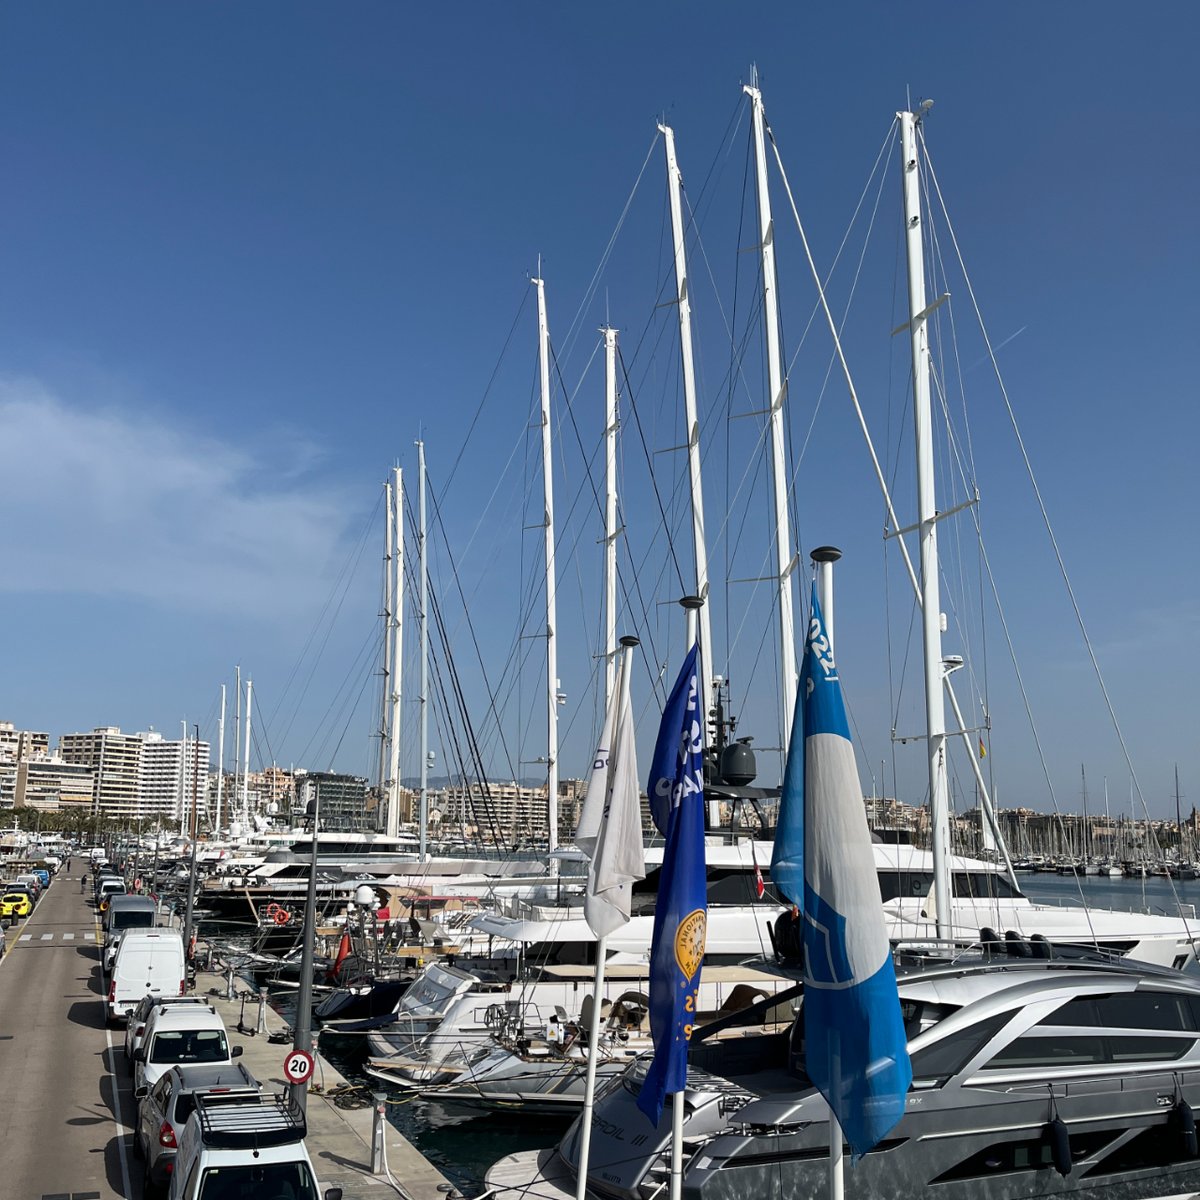 At the marina, we help our clients to manage the Blue Flag distinction for boats, a commitment to good environmental practices on board.

#MarinaPortdeMallorca #clients #Mallorca #environment #Mallorcalife #blueflag #yachtlife #yachtworld #respecttheocean #sealovers